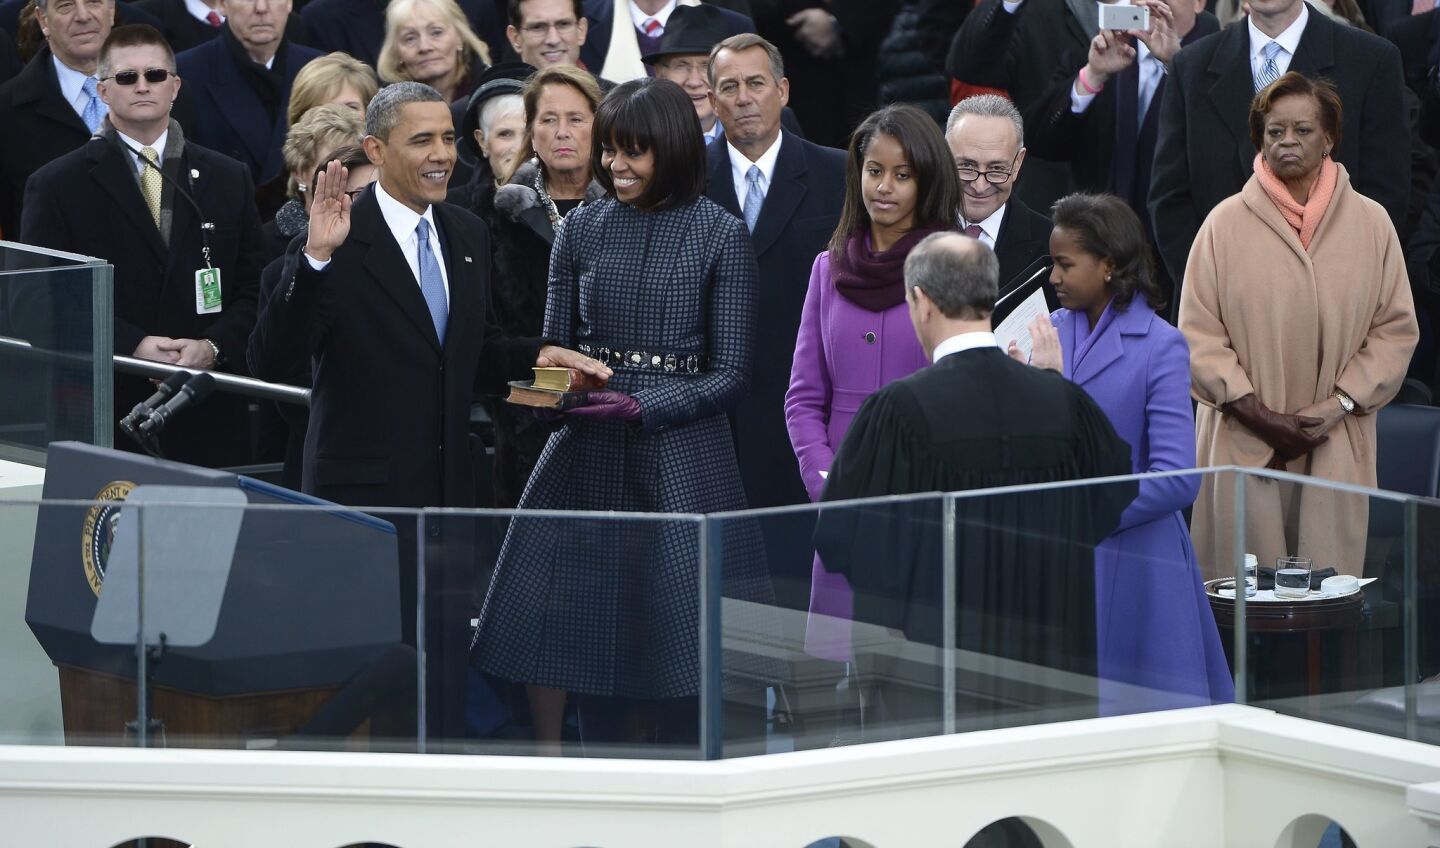 President Barack Obama places his hand on a bible held by Michelle Obama as he is ceremonially sworn in for a second term by Chief Justice John Roberts, right.